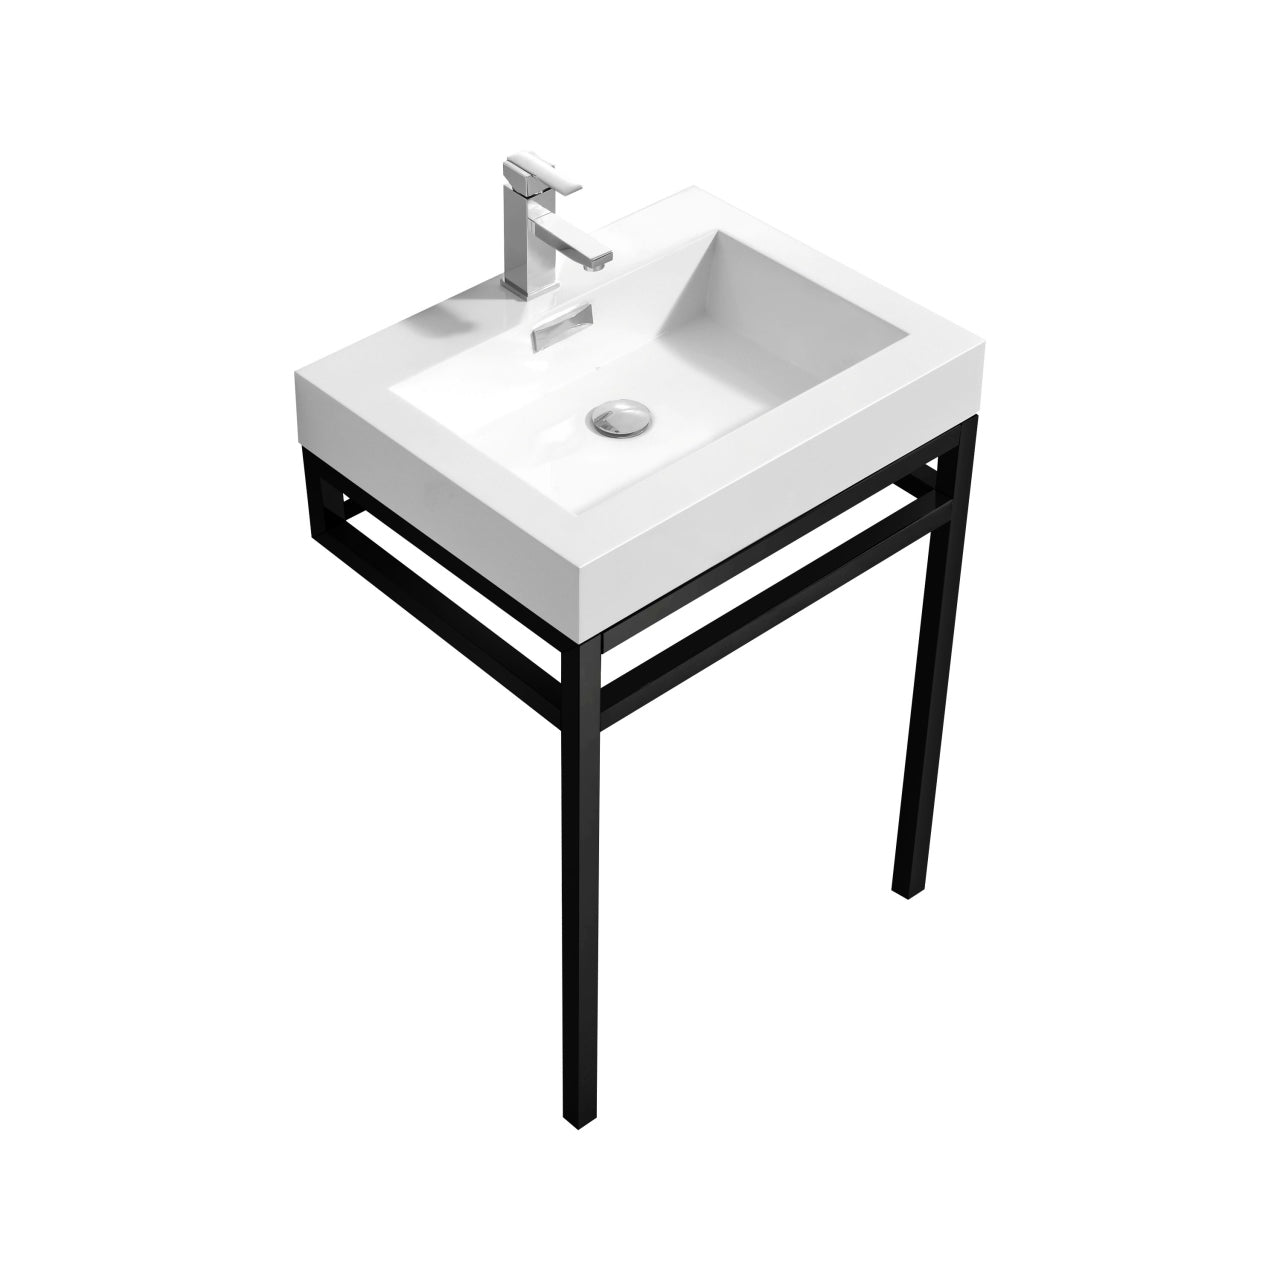 Haus 24" Stainless Steel Console w/ White Acrylic Sink - Home and Bath Depot